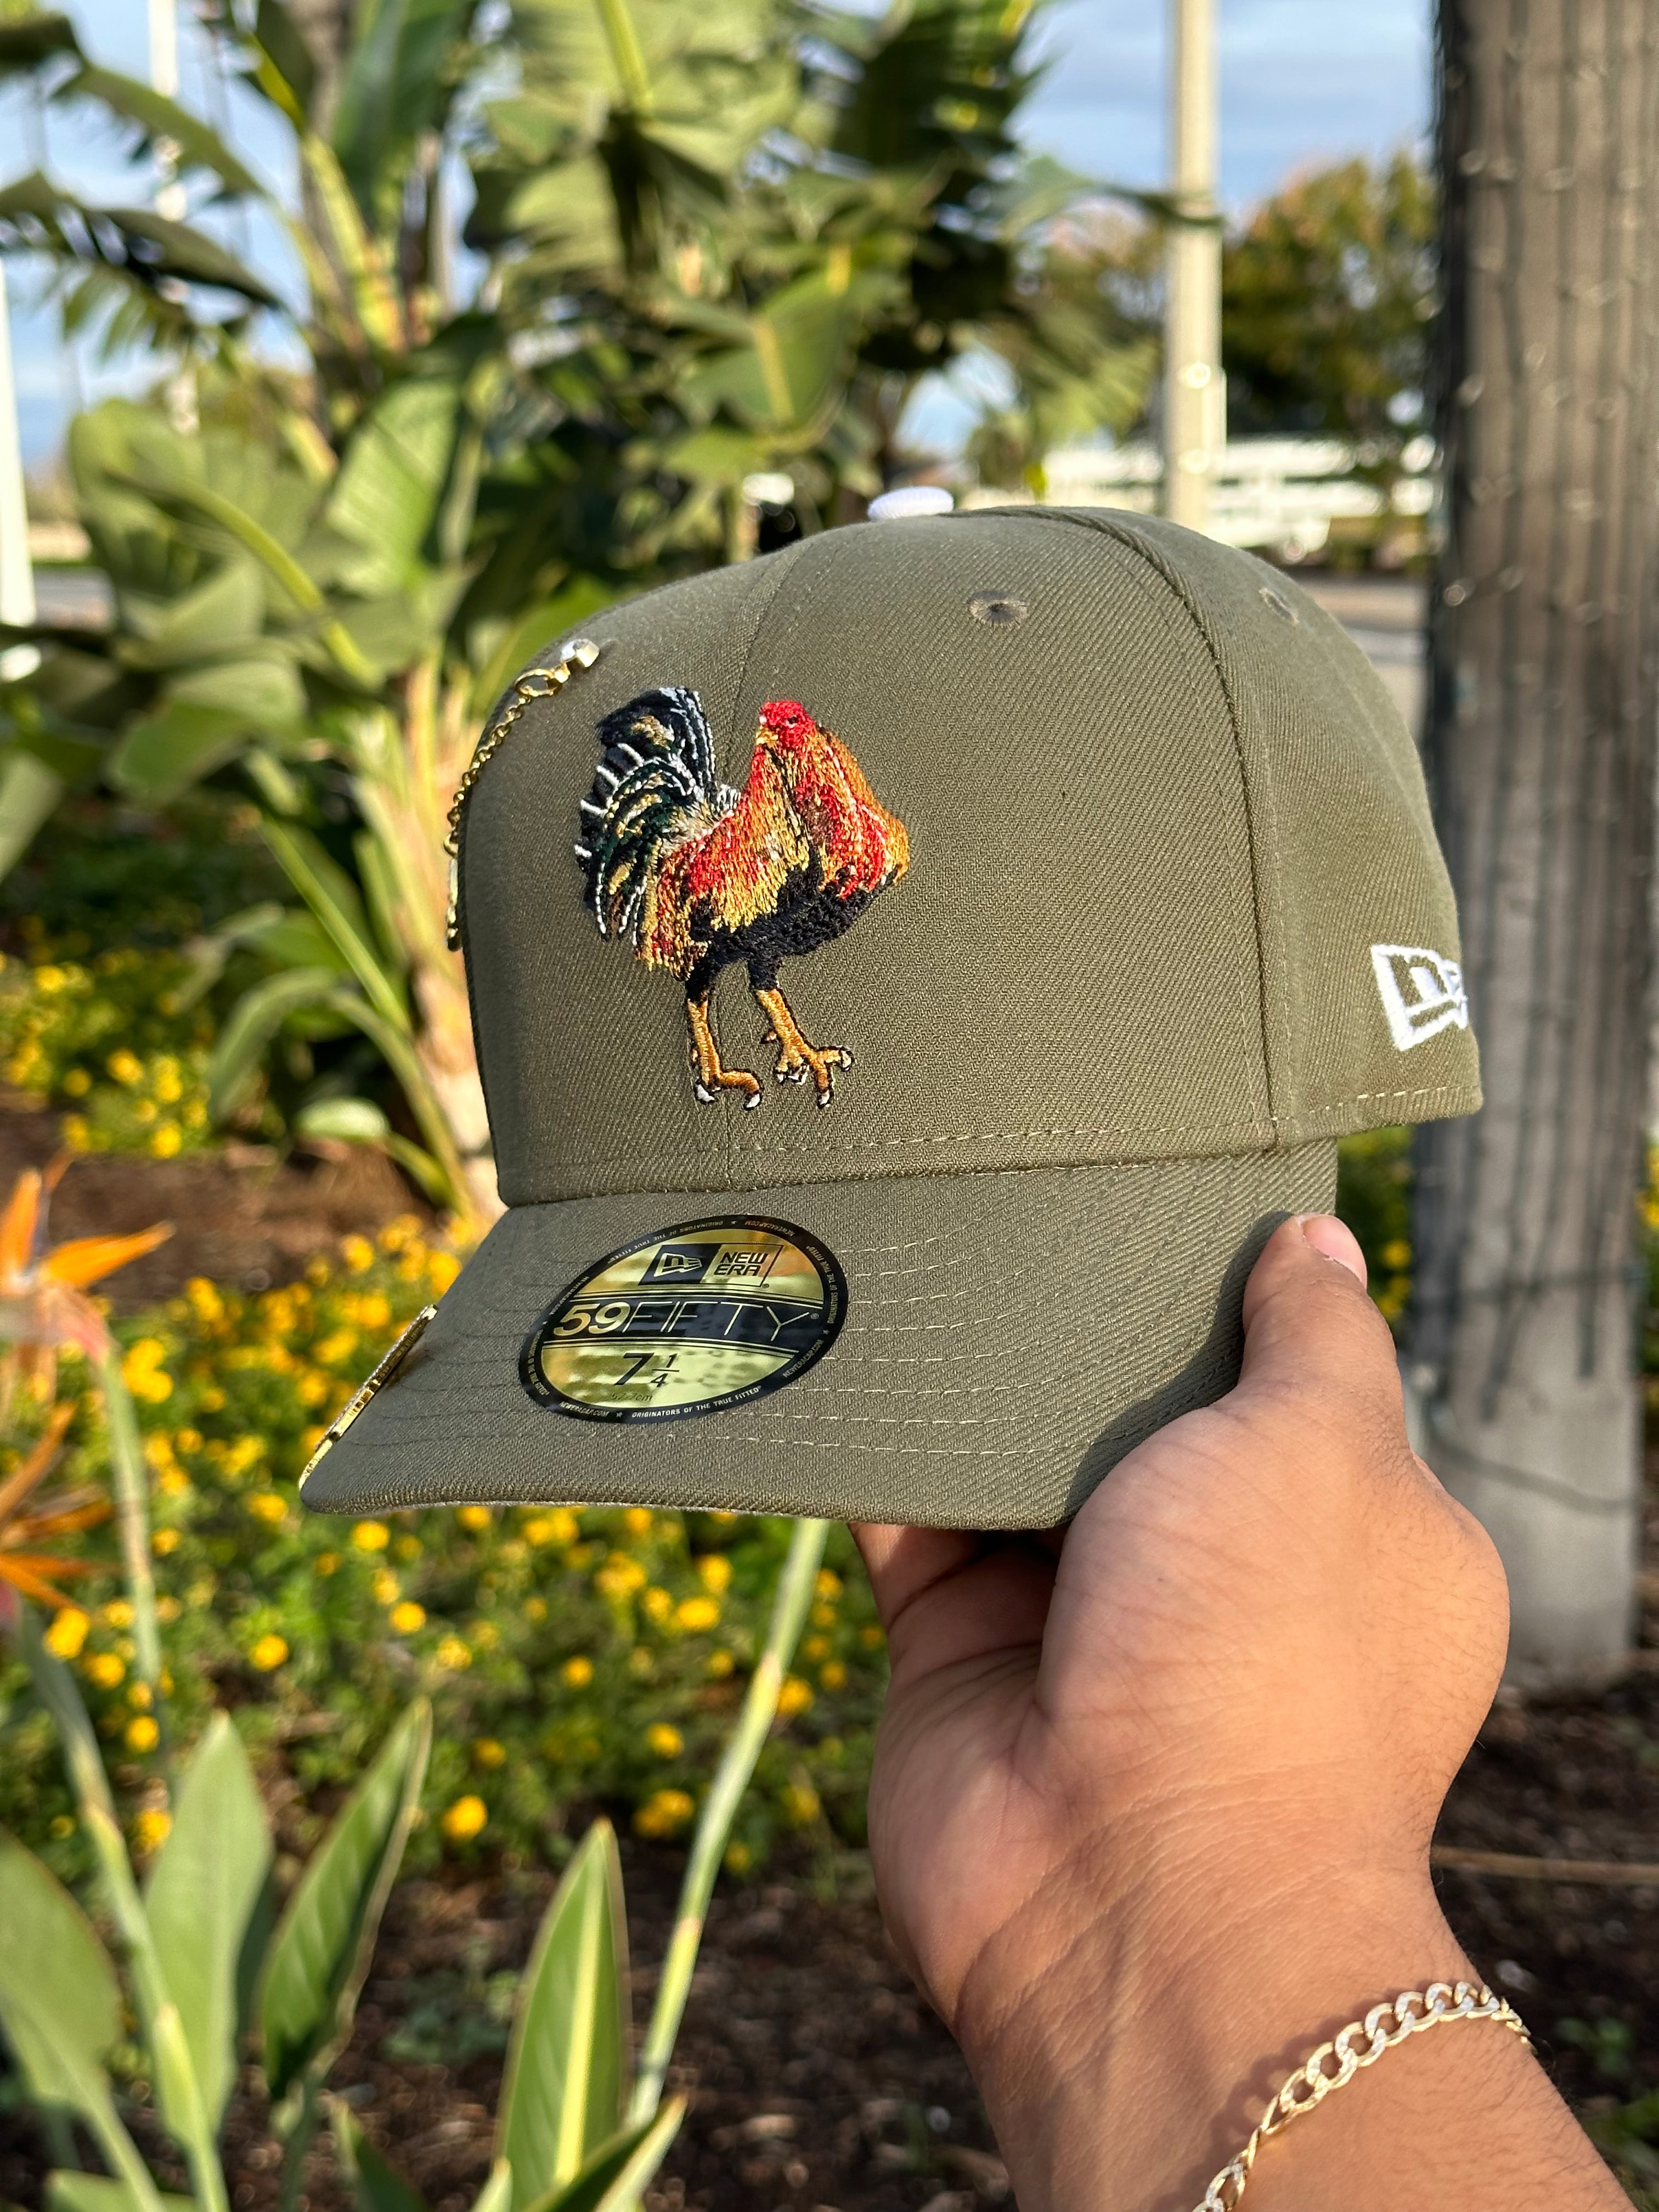 NEW ERA EXCLUSIVE 59FIFTY OLIVE MEXICO "EL GALLO" W/ MEXICO FLAG SIDE PATCH